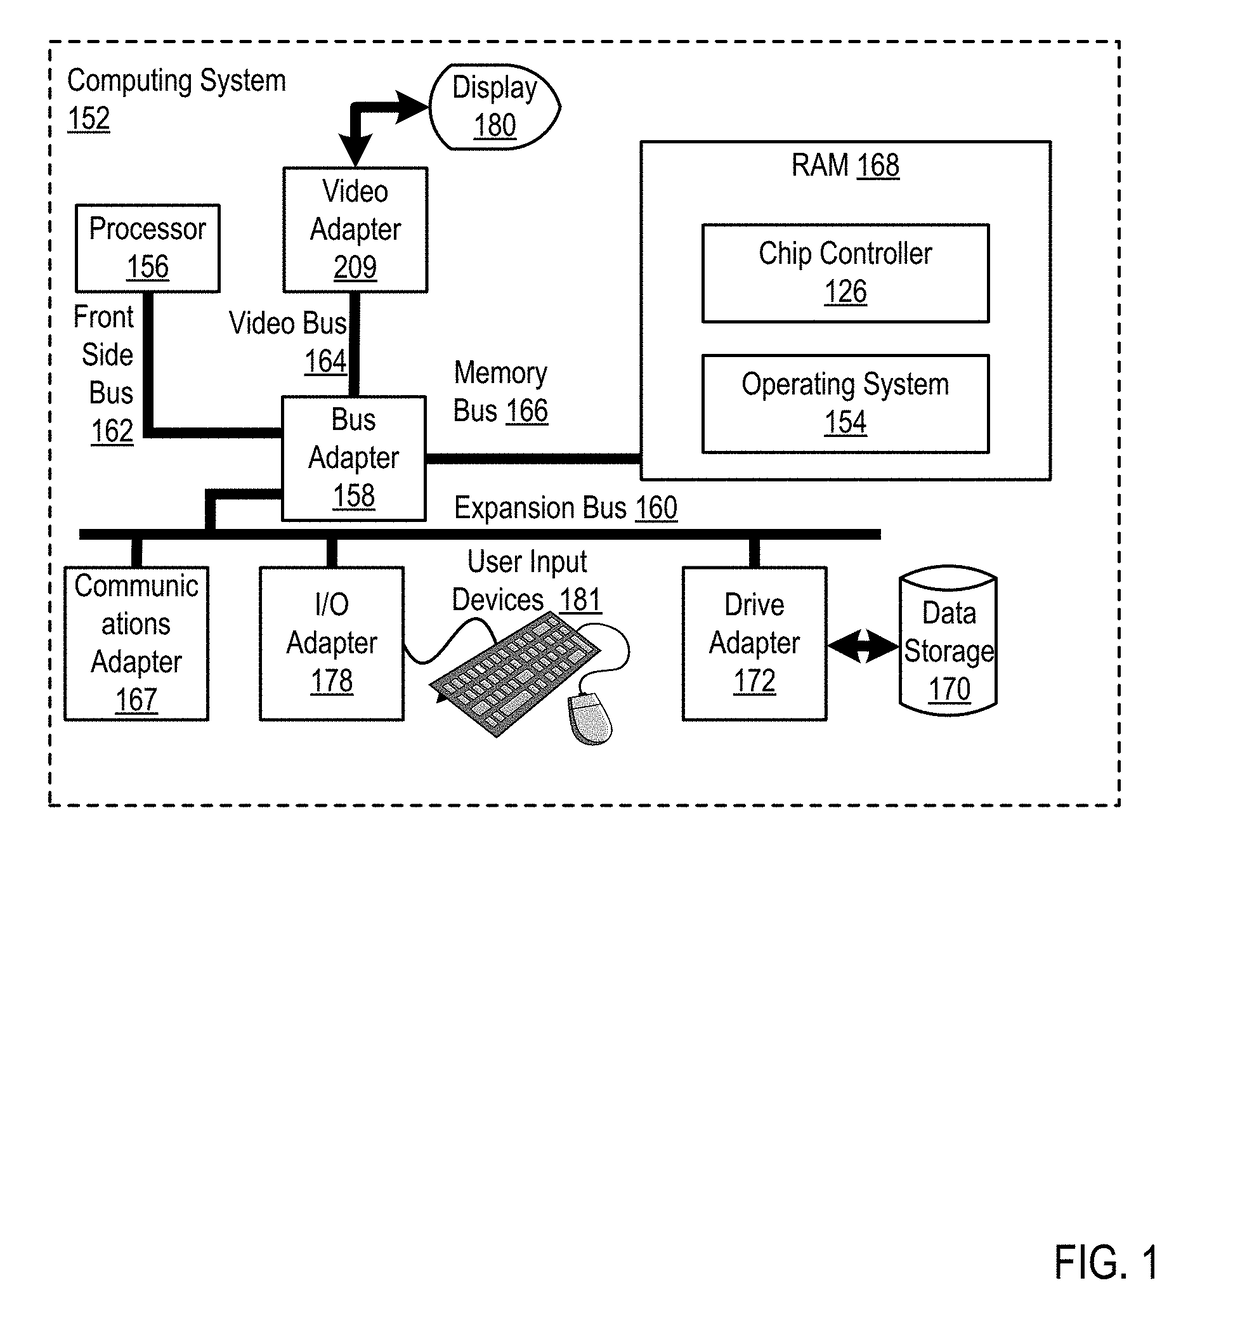 Predicting data correlation using multivalued logical outputs in static random access memory (SRAM) storage cells